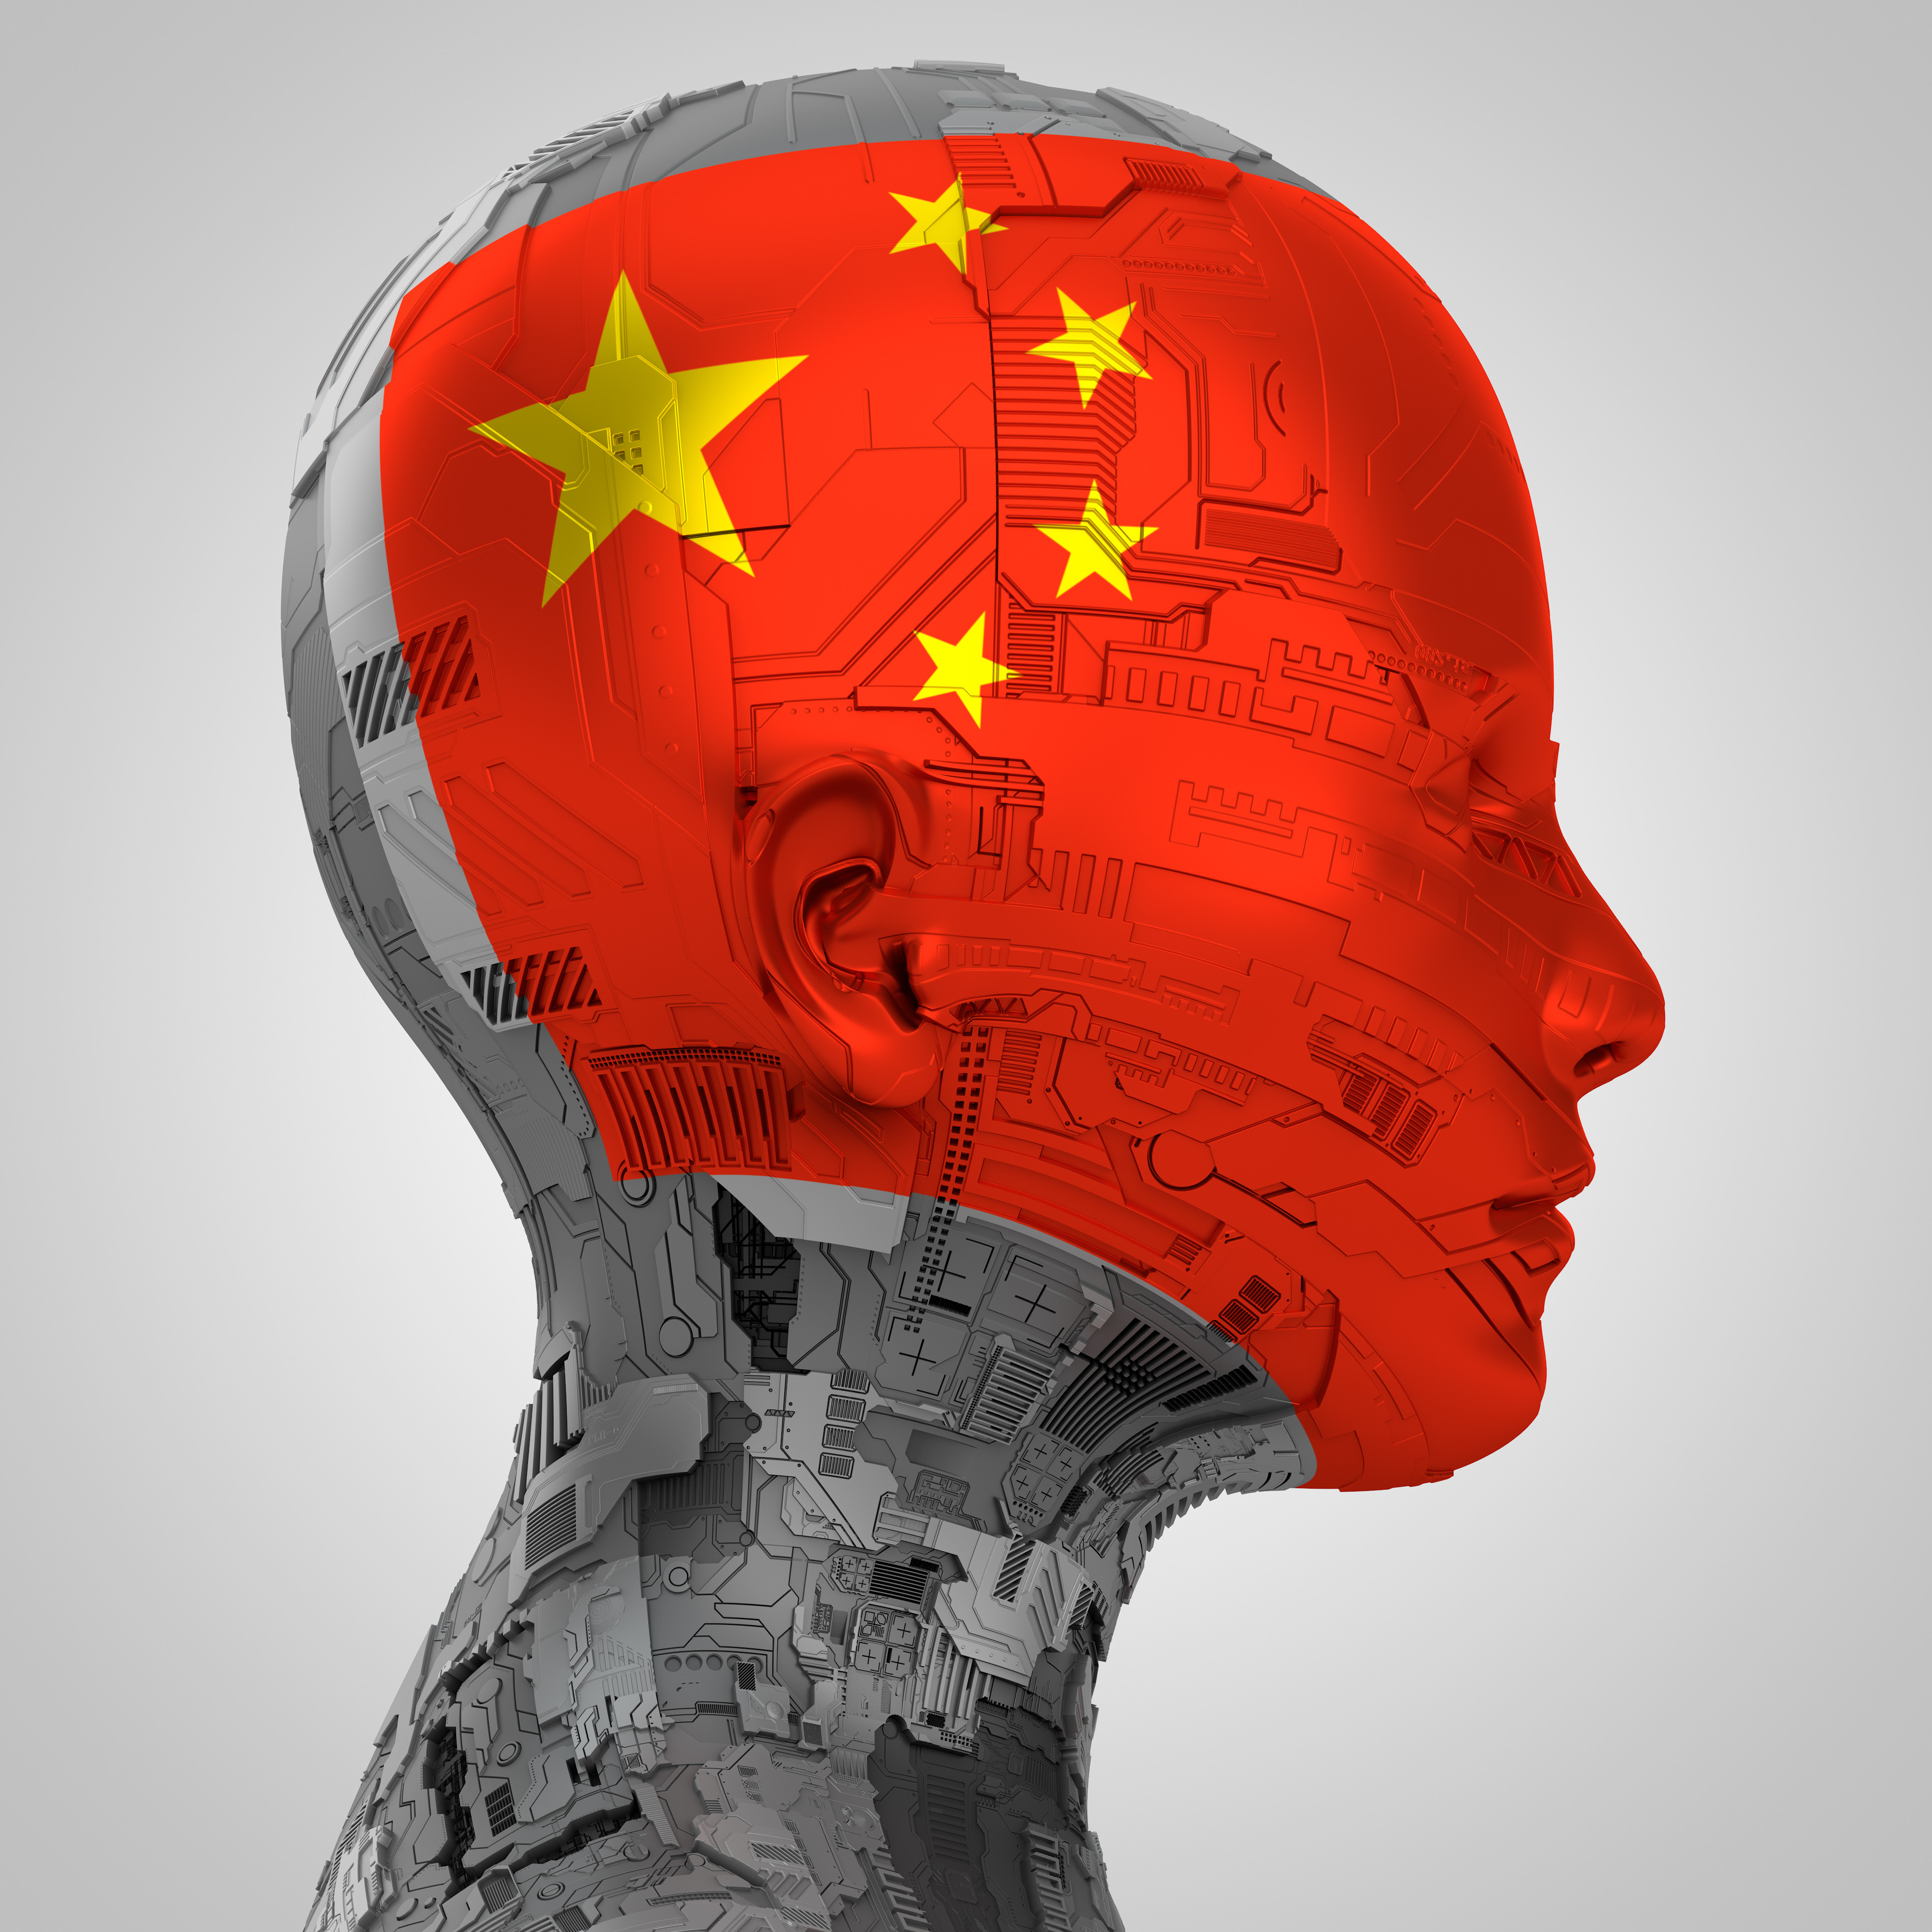 China’s Minister of Science and Technology, Wang Zhigang, said artificial intelligence development could be a double-edged sword that enhances efficiency in industries, while bringing potential risks. Image: Shutterstock